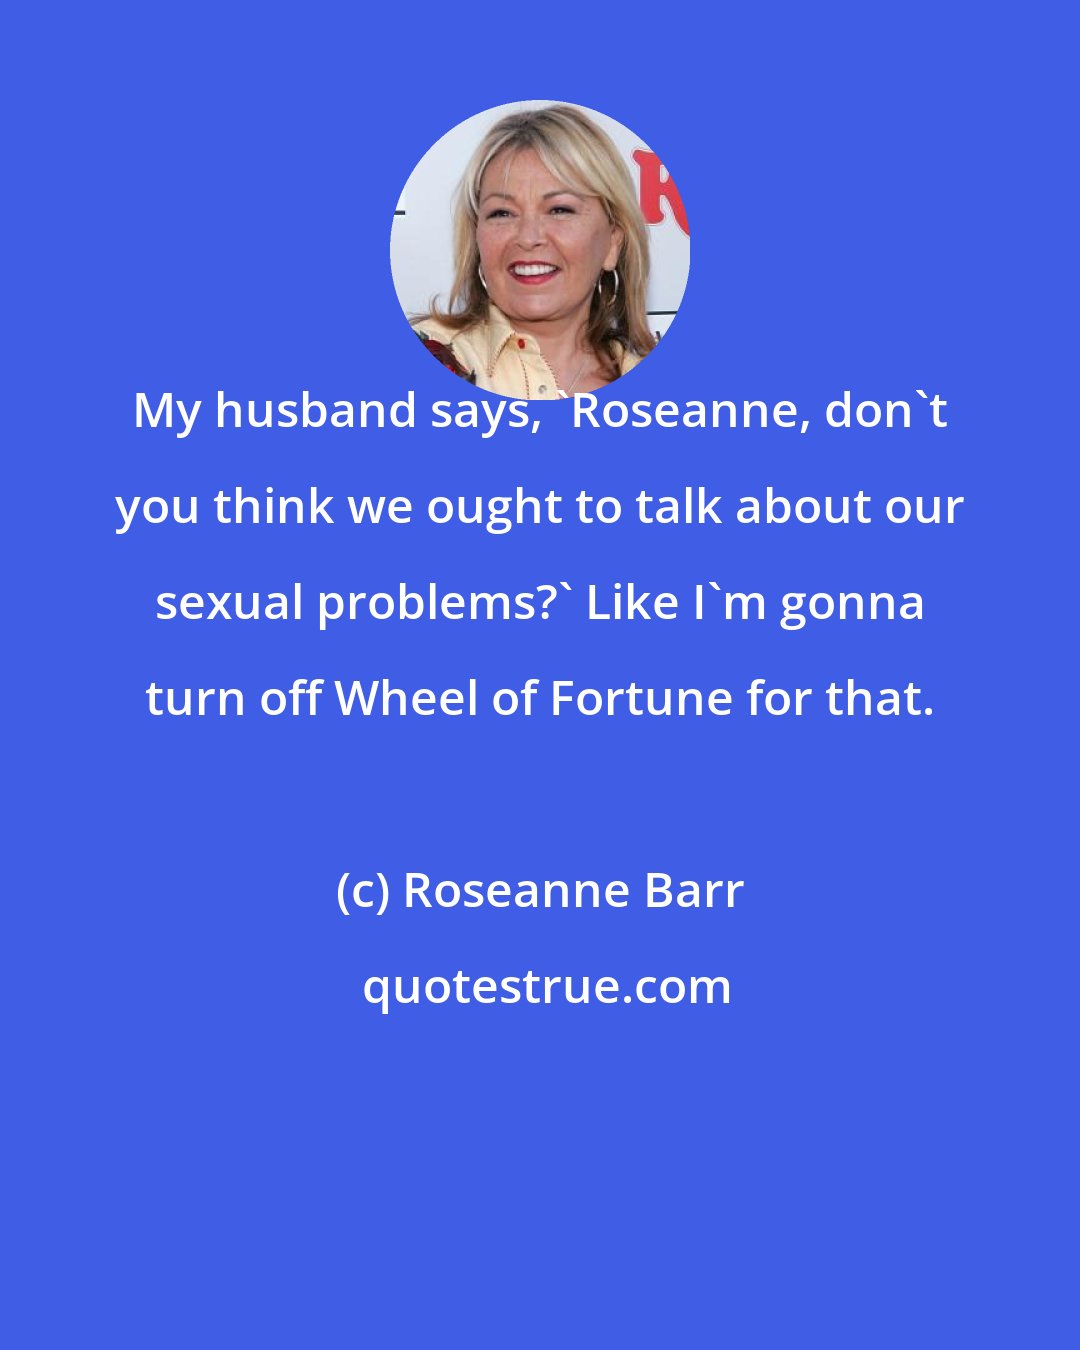 Roseanne Barr: My husband says, 'Roseanne, don't you think we ought to talk about our sexual problems?' Like I'm gonna turn off Wheel of Fortune for that.